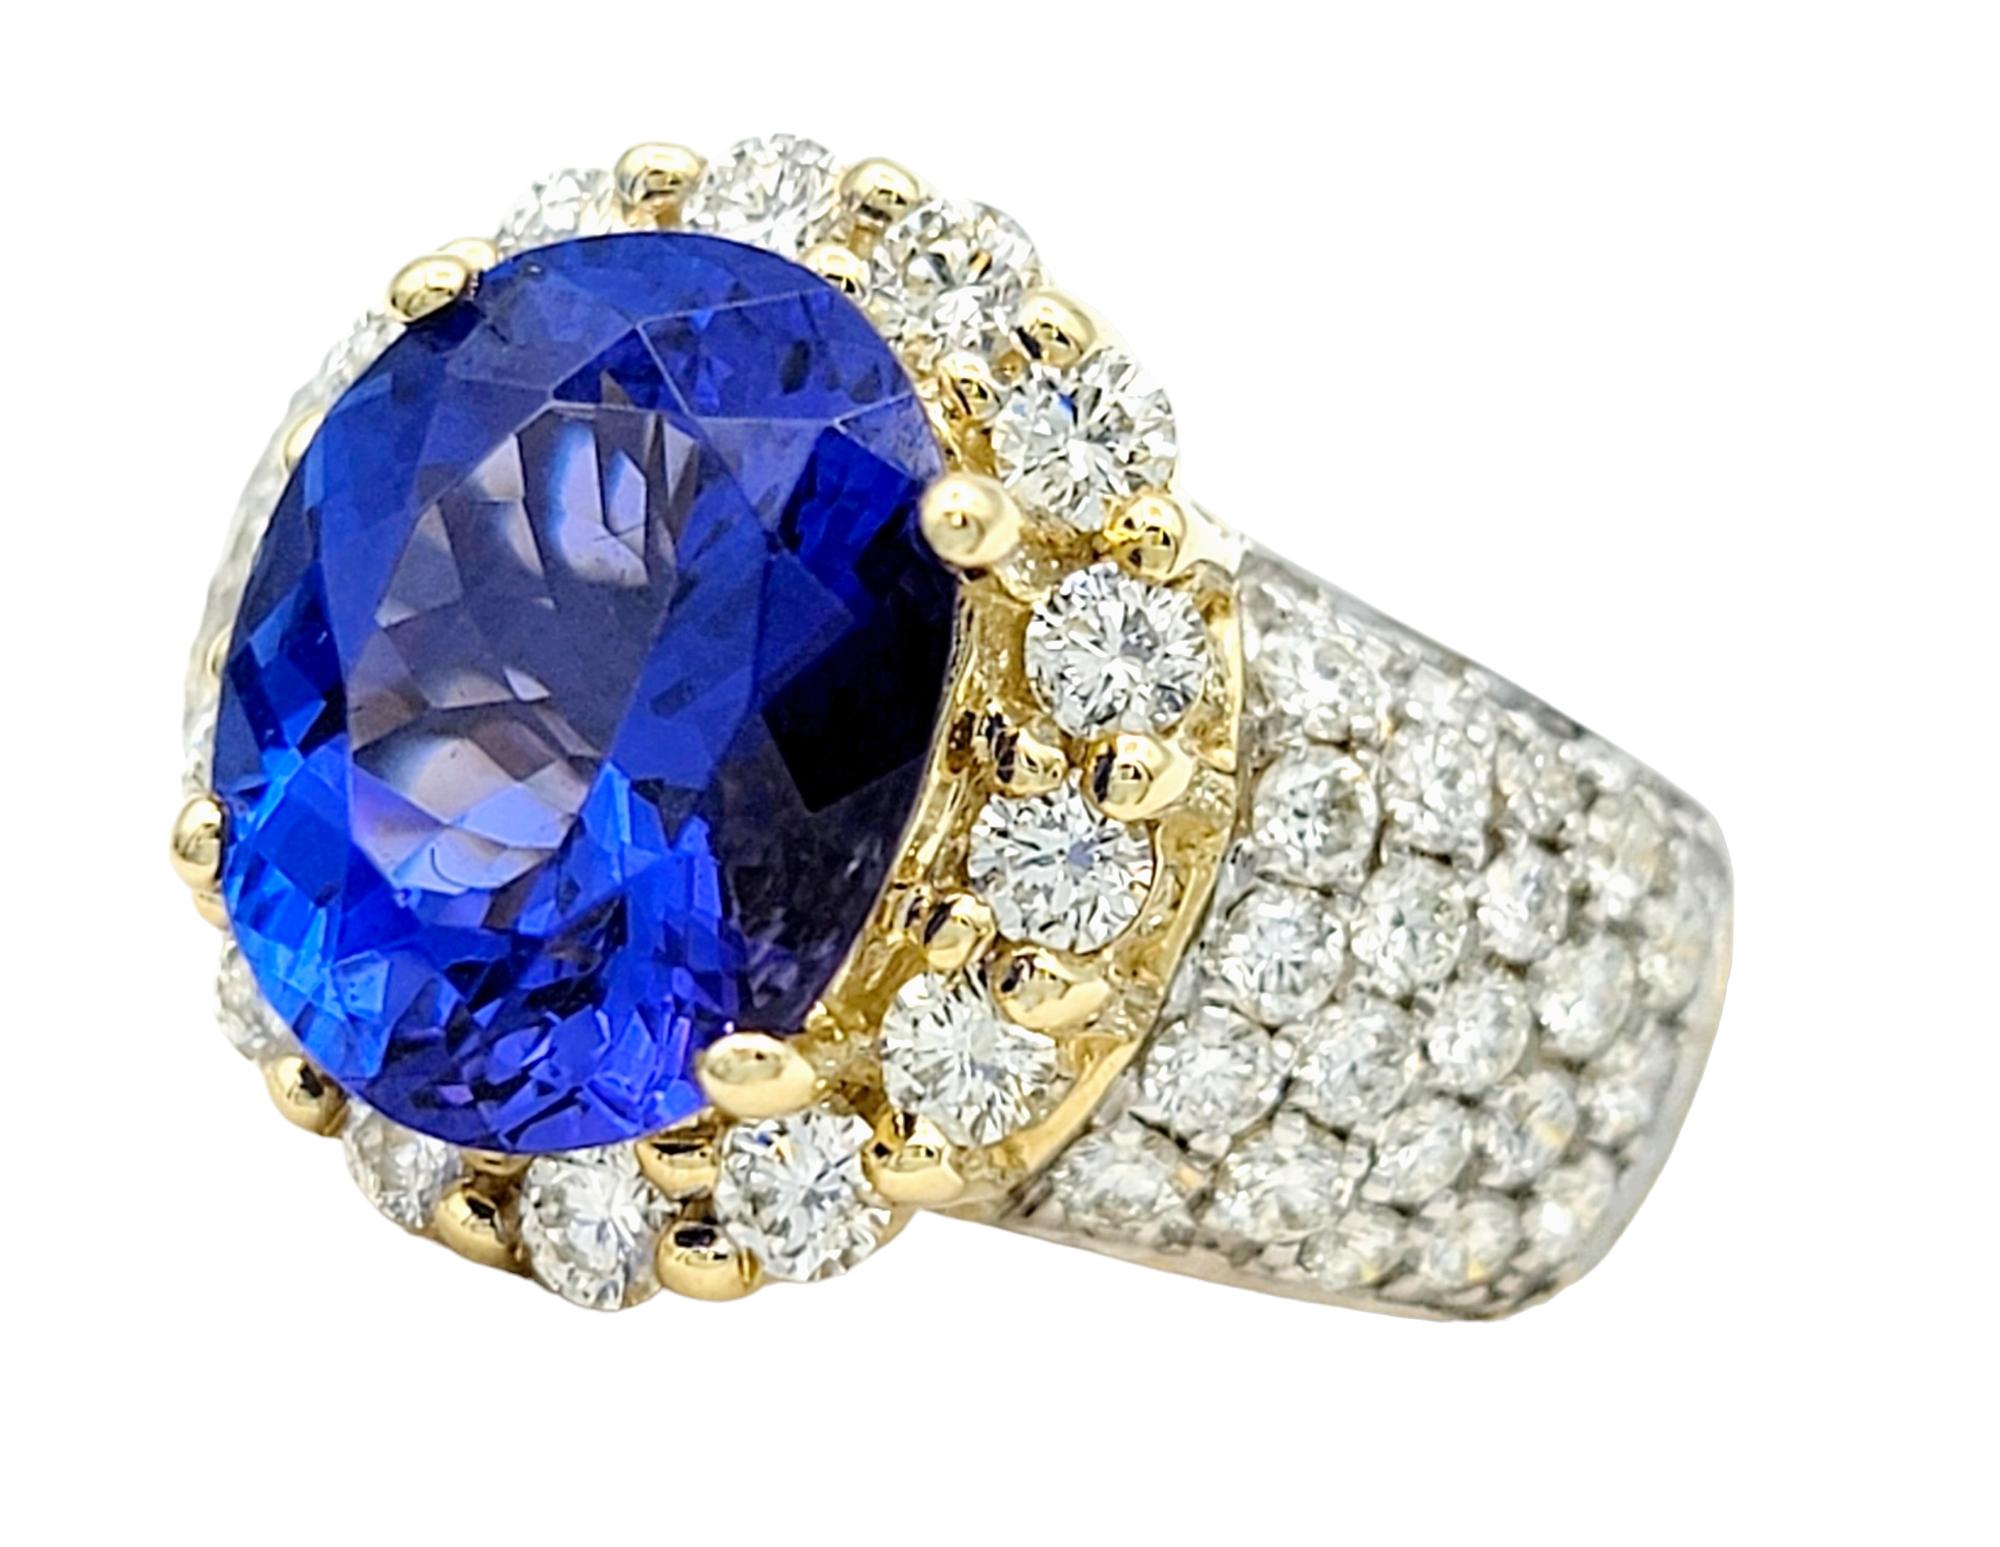 Contemporary 4.98 Carat Total Oval Tanzanite and Diamond Halo Cocktail Ring in 14 Karat Gold For Sale